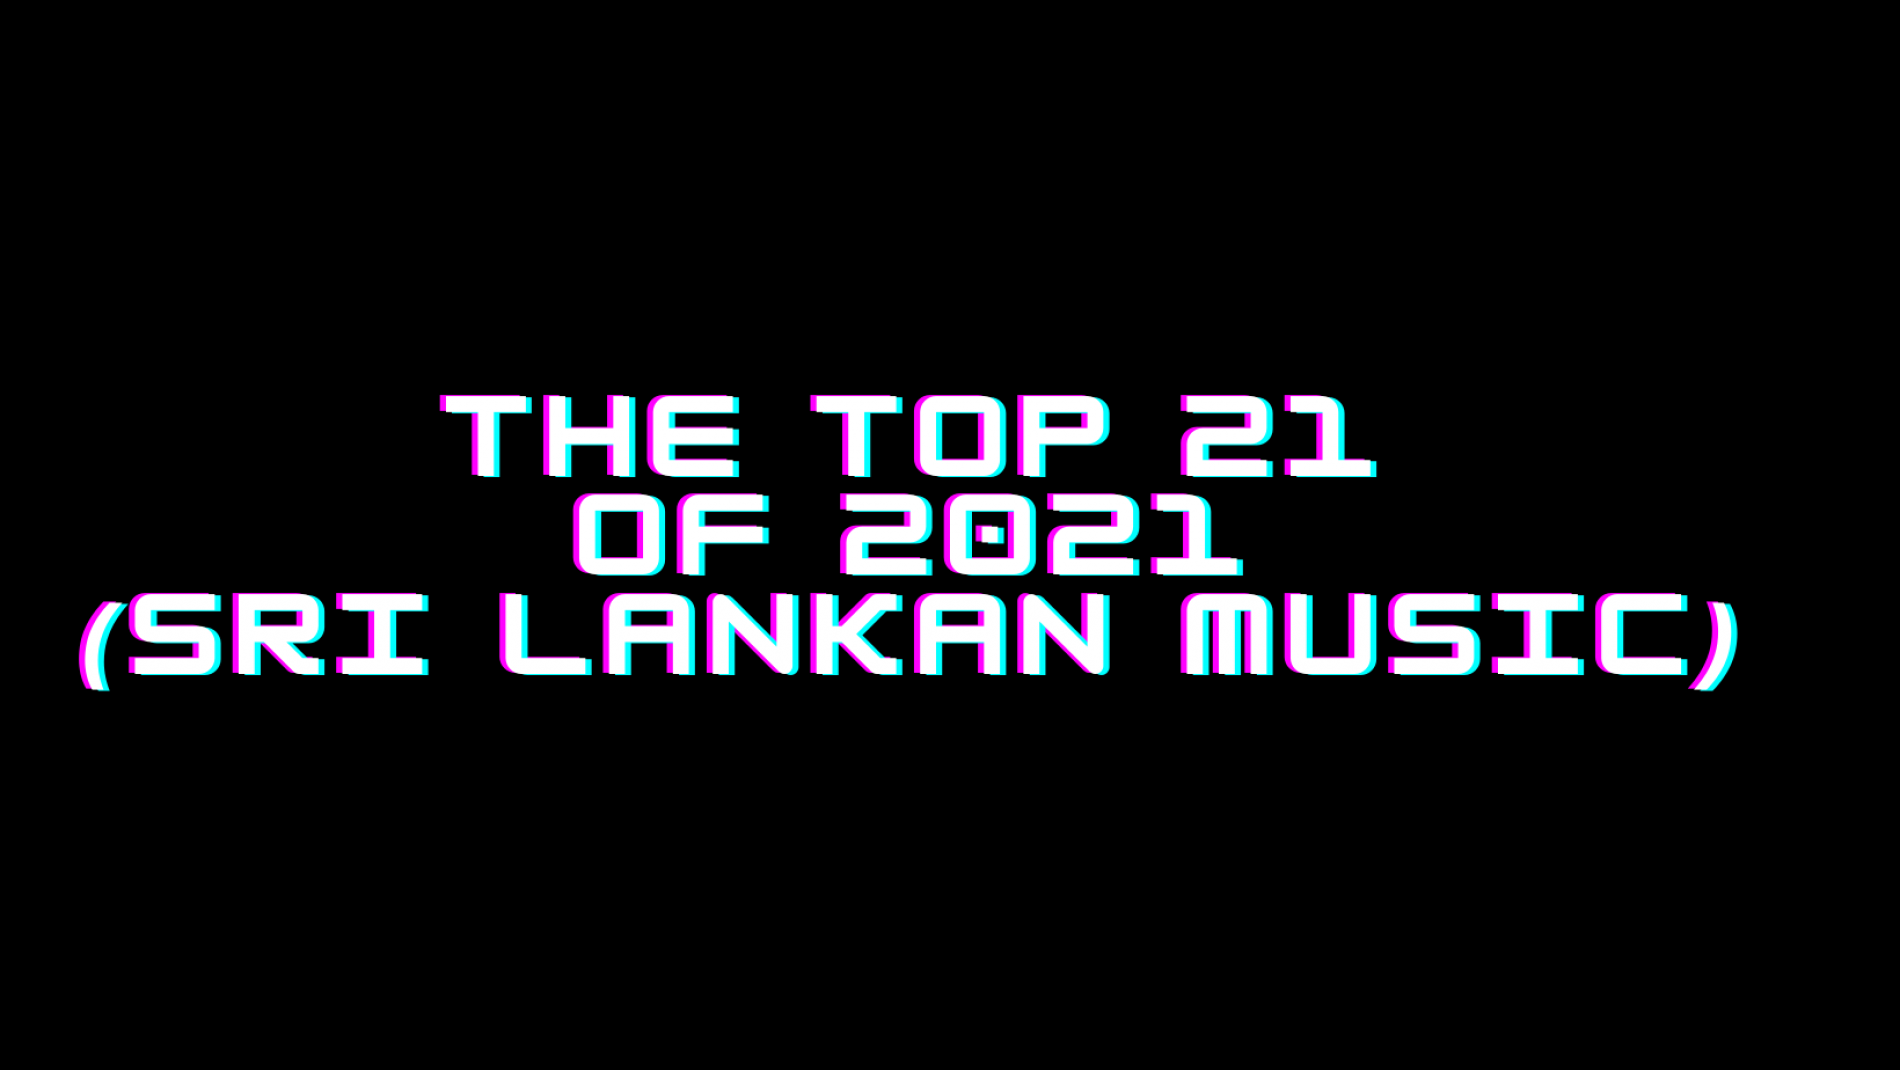 The Top 21 Of 2021 In Music From Sri Lanka